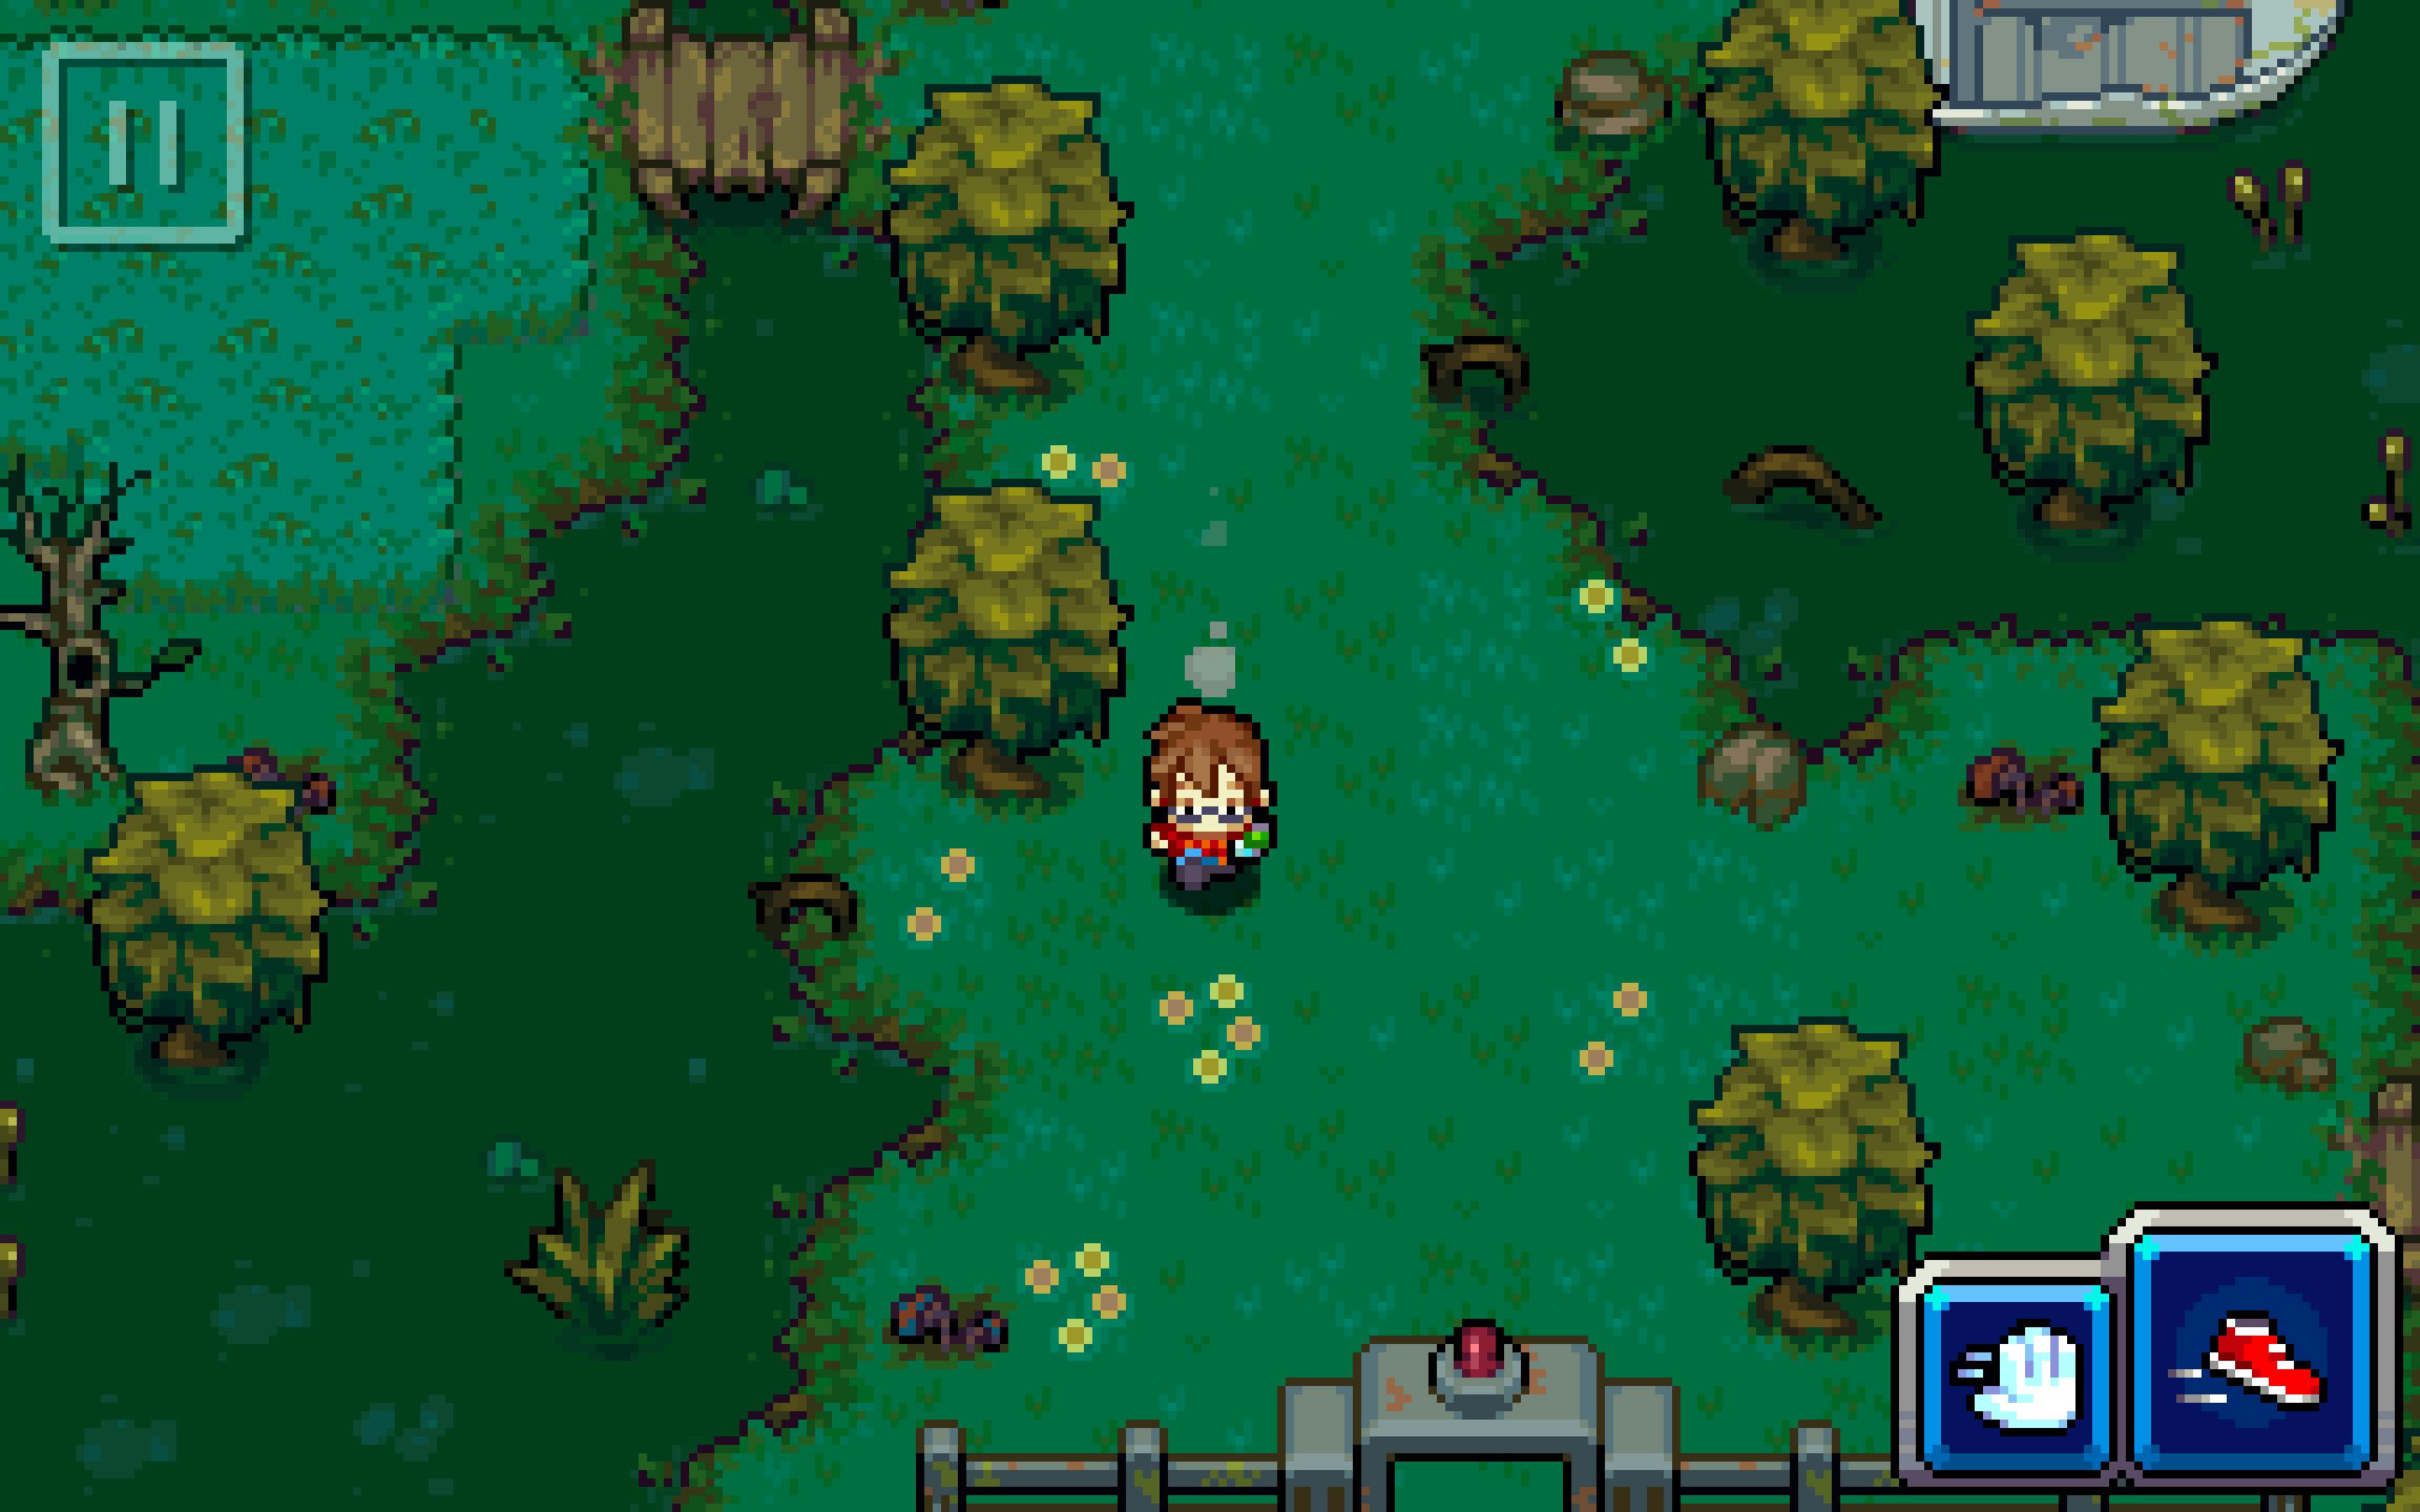 A screenshot from Coromon, showing the player character simply standing in a field.